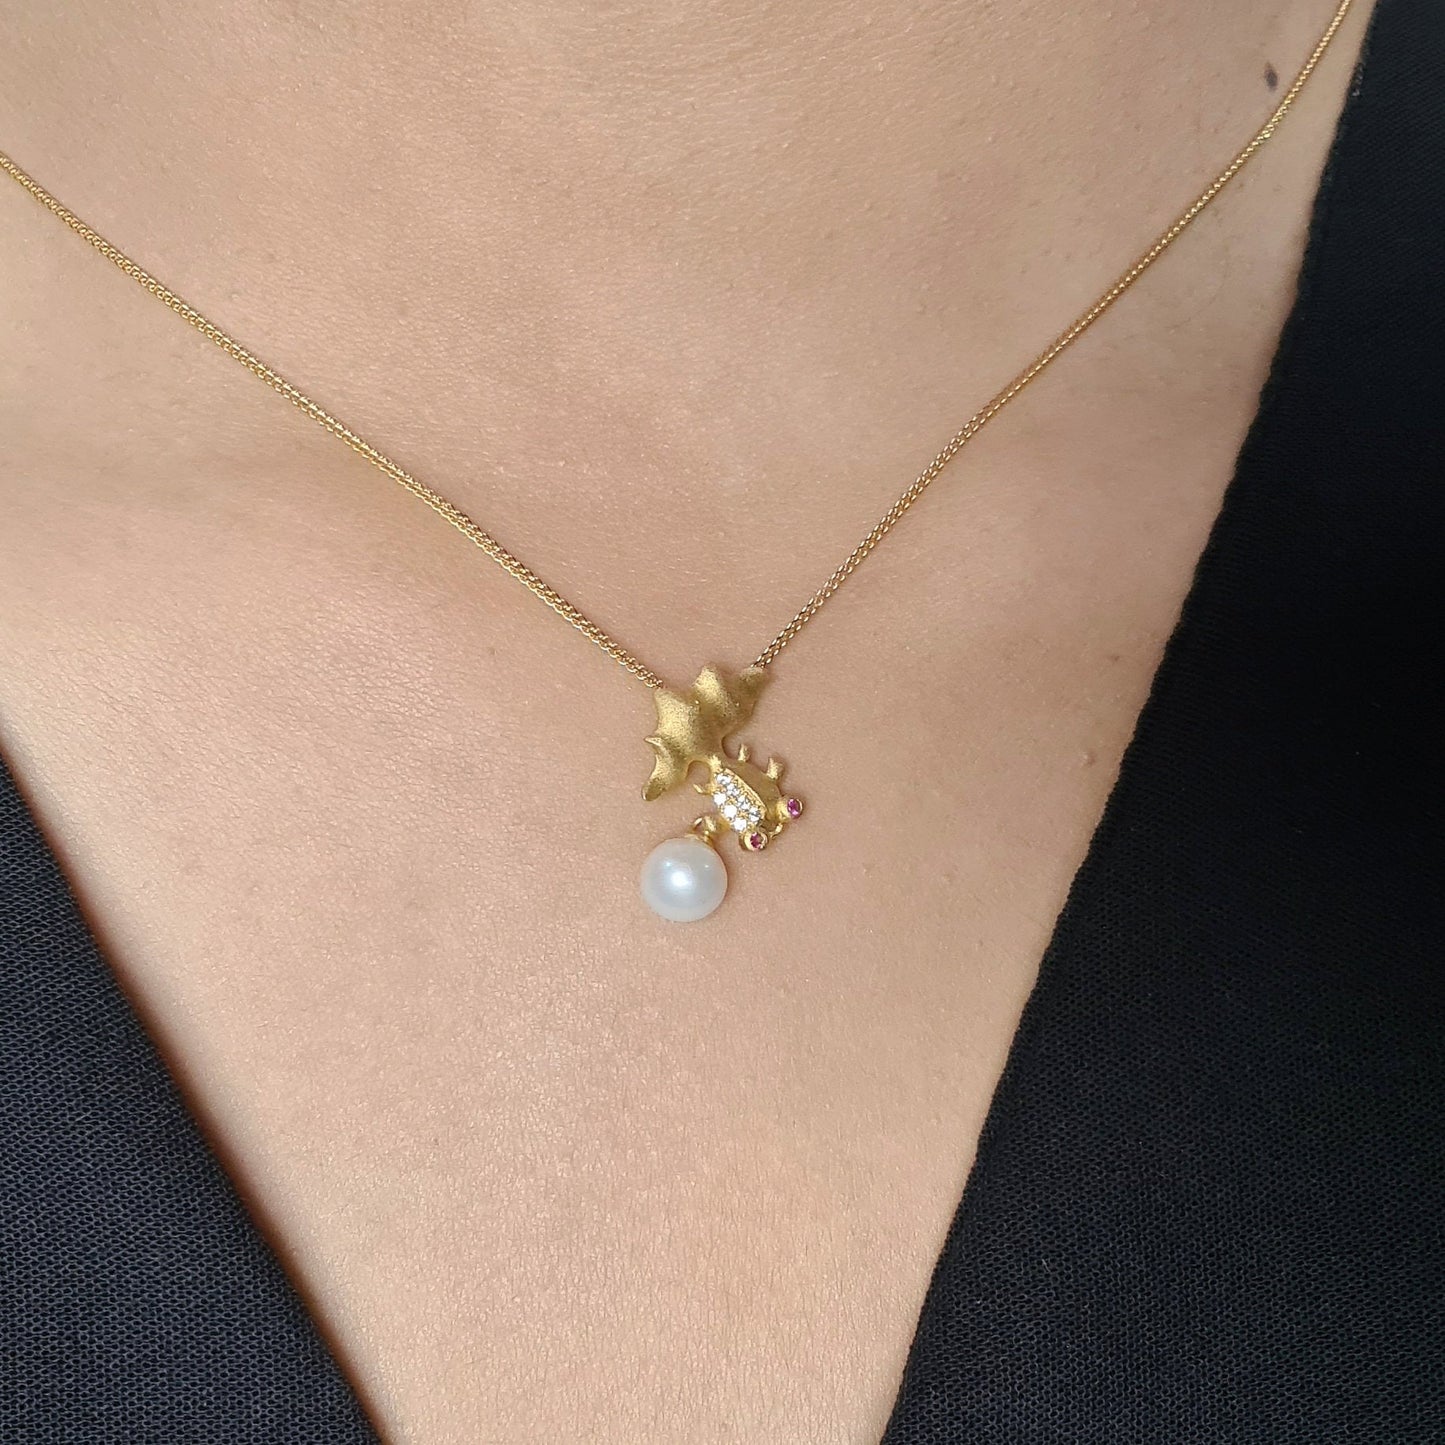 Gold Fish Vermeil Pendant with Chain with AAA fresh water Pearl Necklace